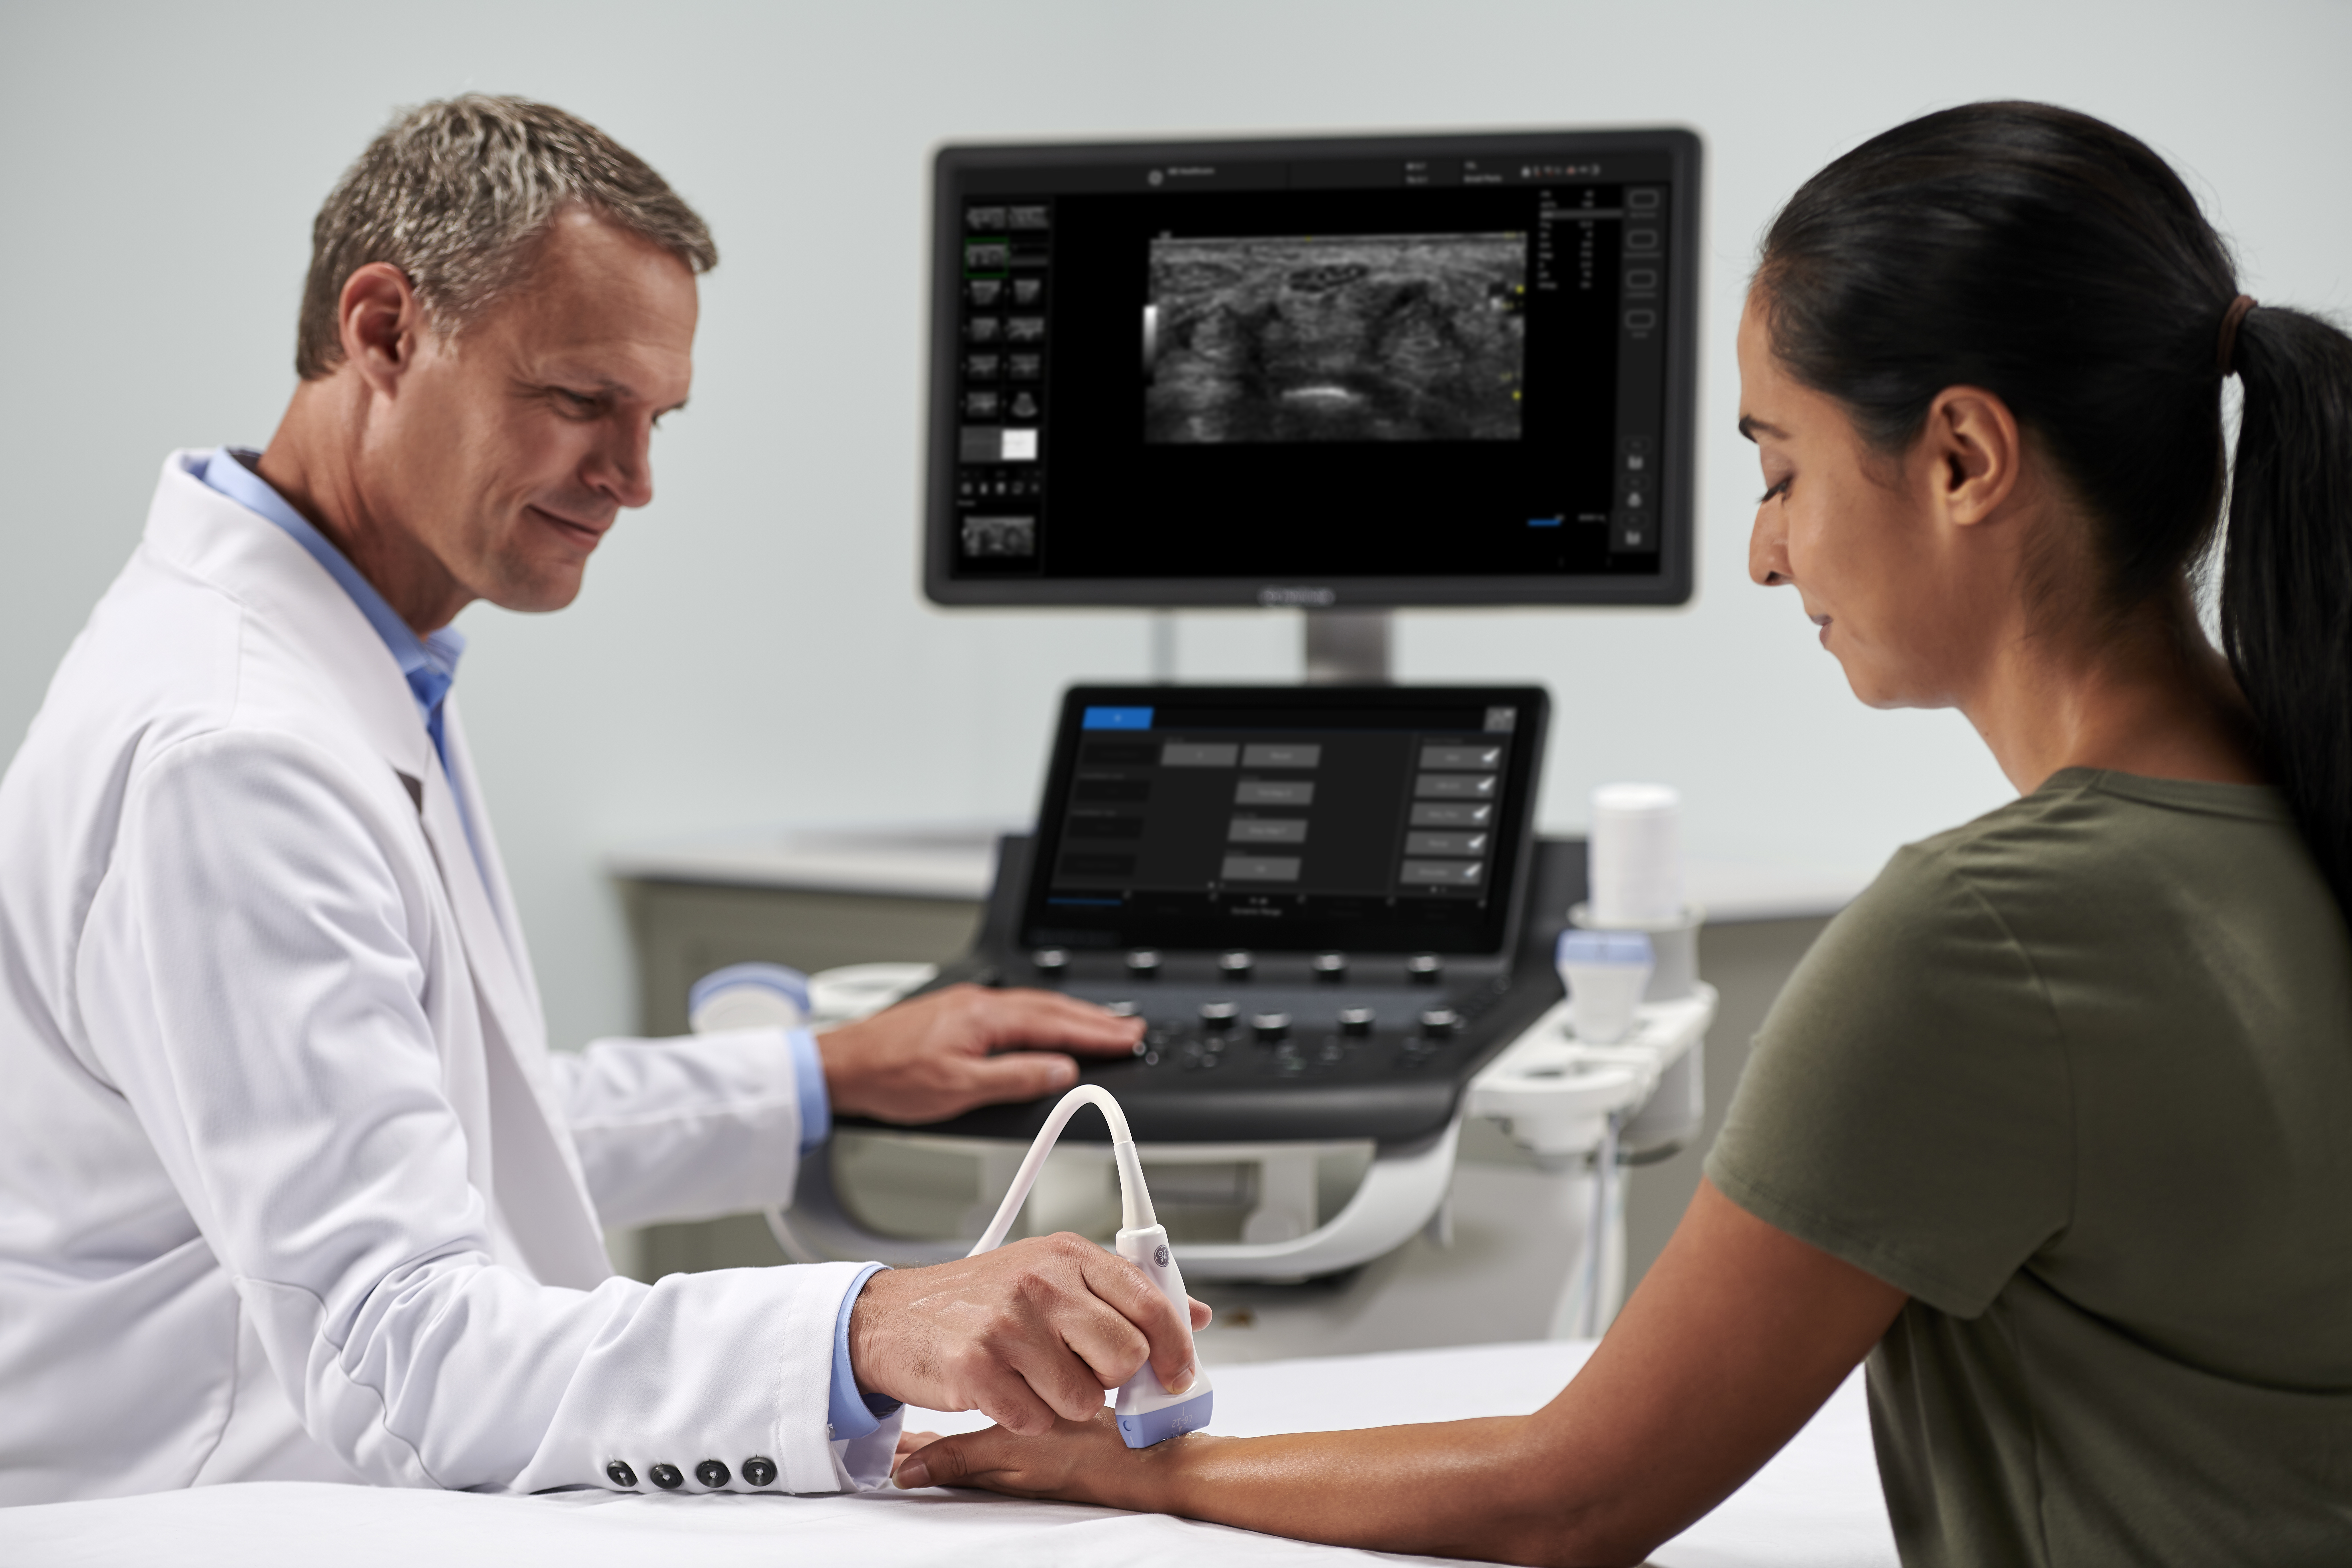 A clinician utilizes ultrasound to scan a patient